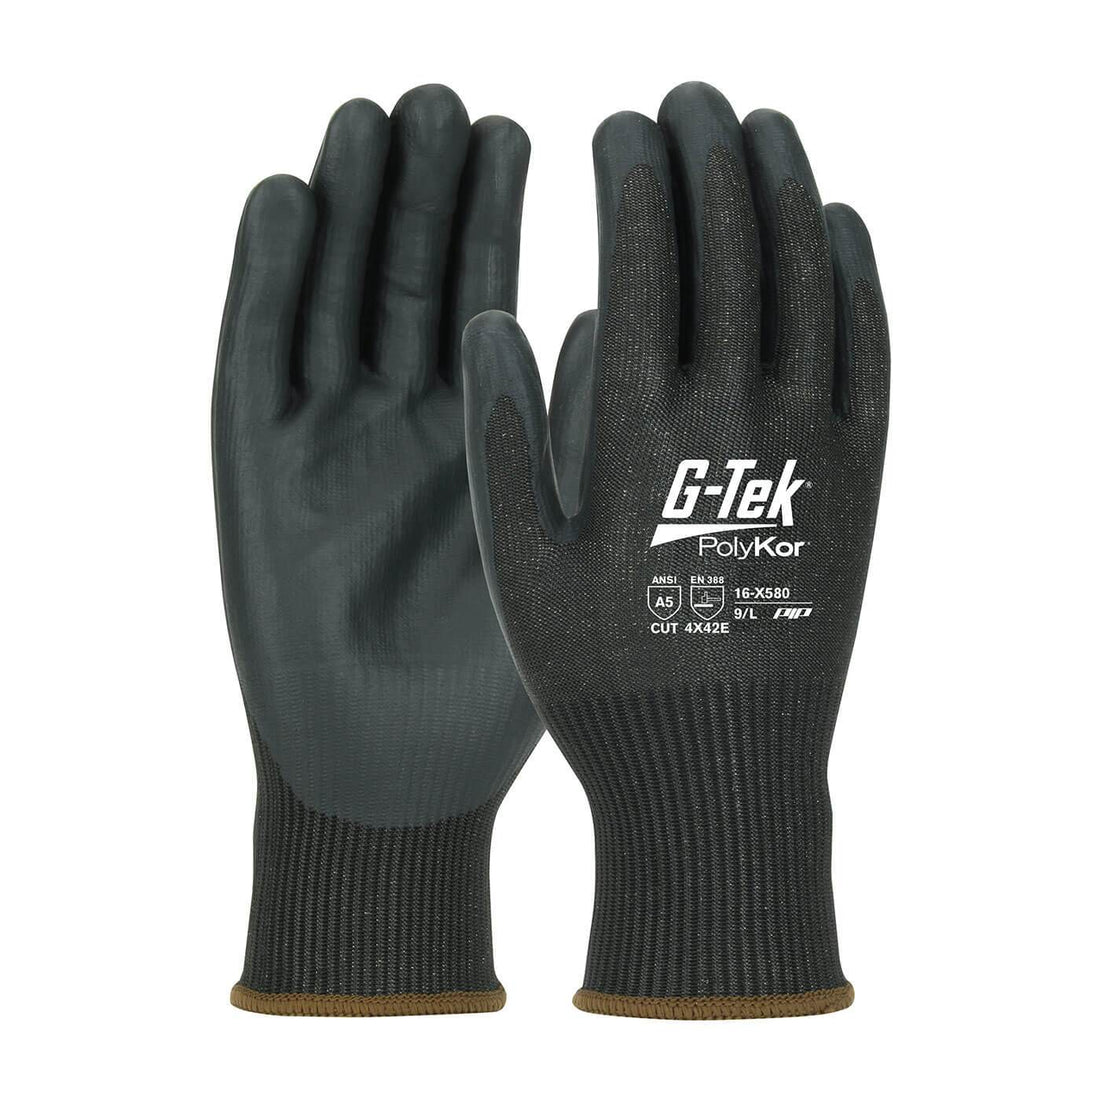 Some Must-Have Gloves Around the House